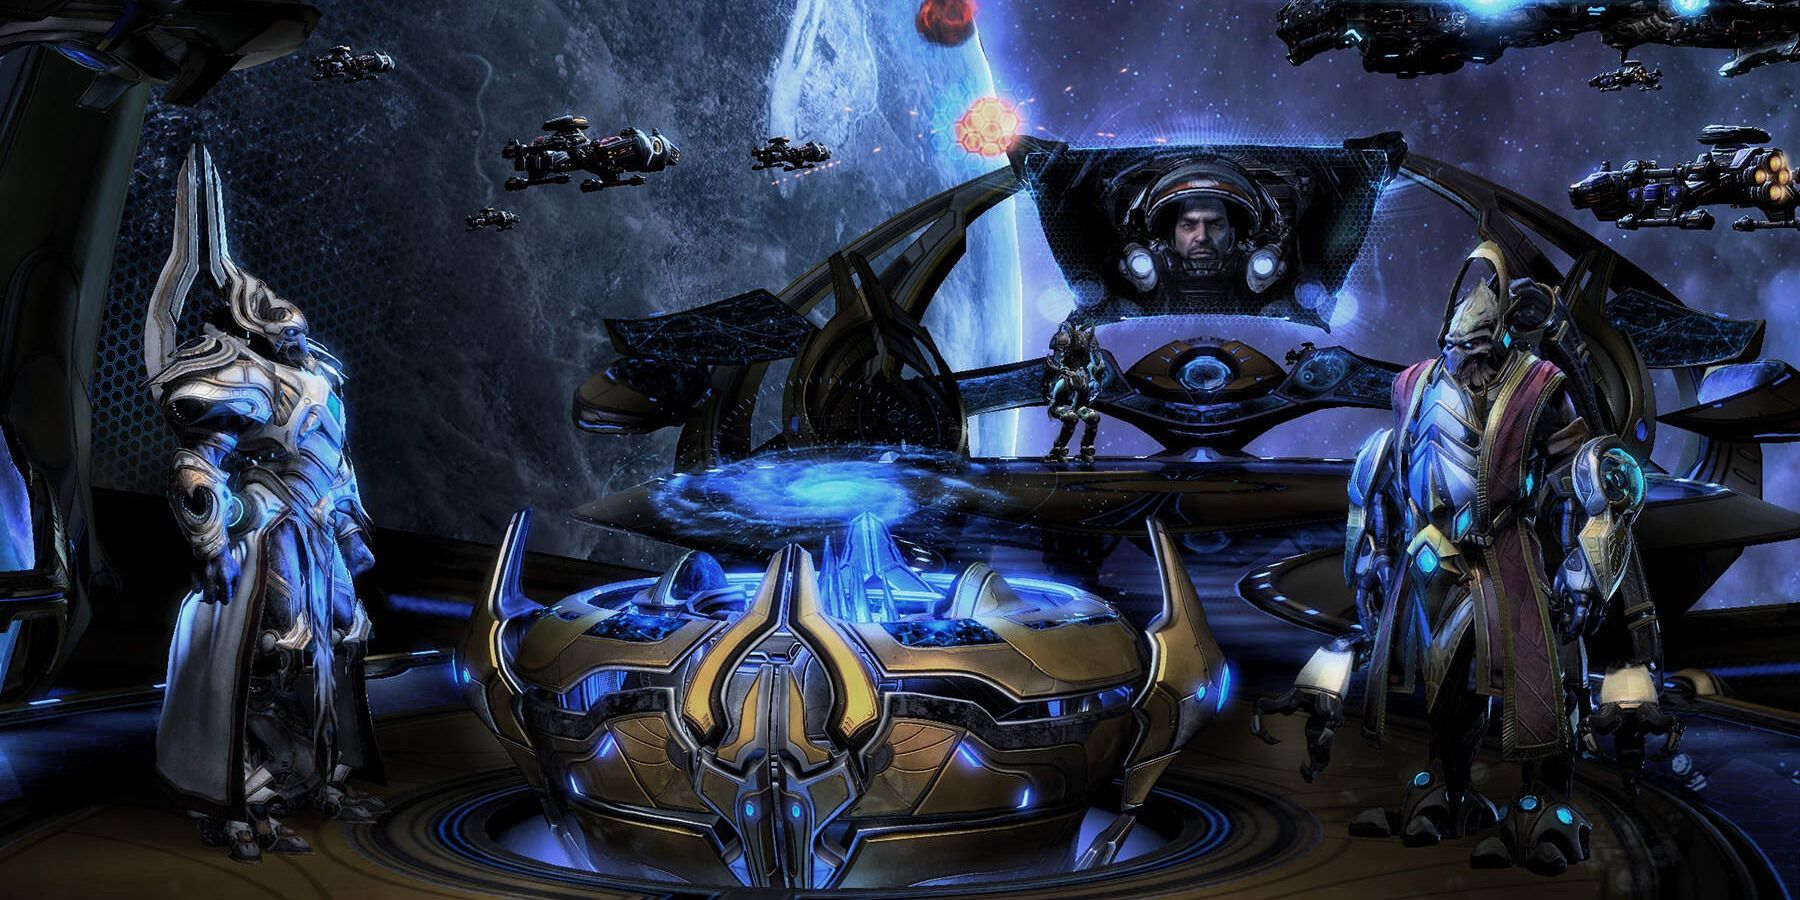 Starcraft 2's Protoss leaders discuss their next move in-game.